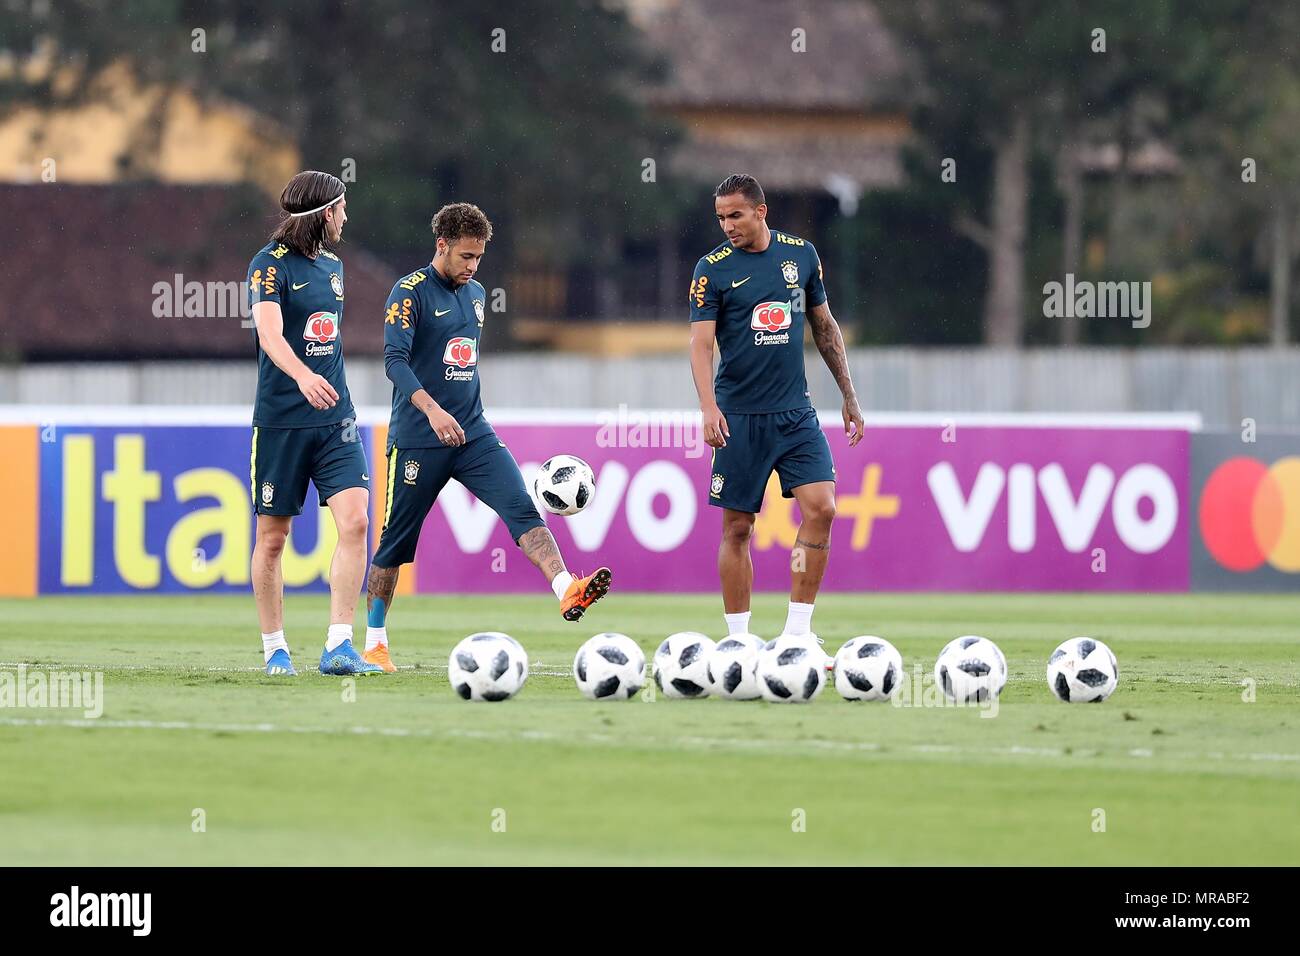 (180526) -- TERESOPOLIS, May 26, 2018 -- Neymar (C) kicks the ball during a training session of the Brazilian national soccer team ahead of the Russia World Cup in Teresopolis, Brazil, on May 25, 2018. (Xinhua/Li Ming) Stock Photo